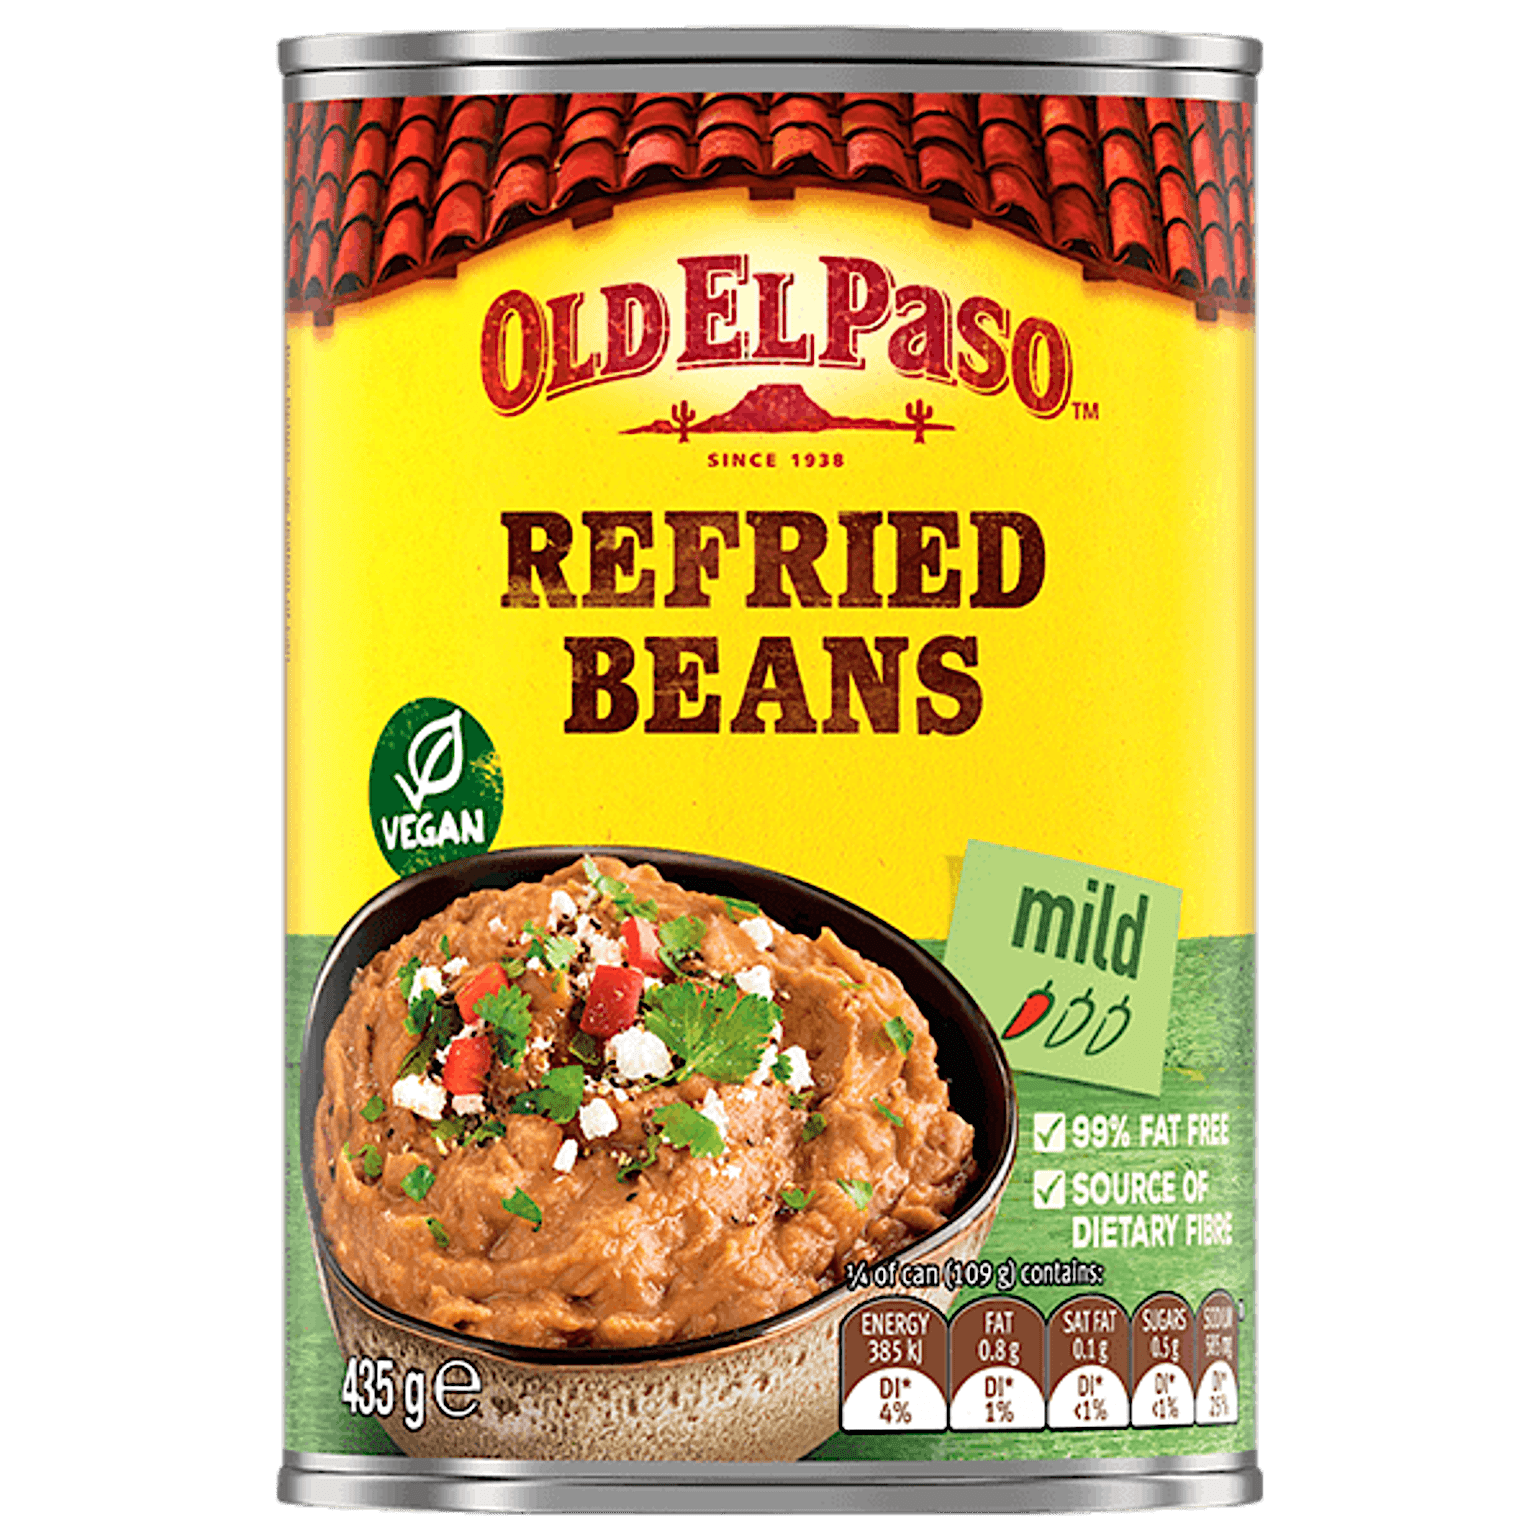 a can of Old El Paso's refried beans mild (435g)